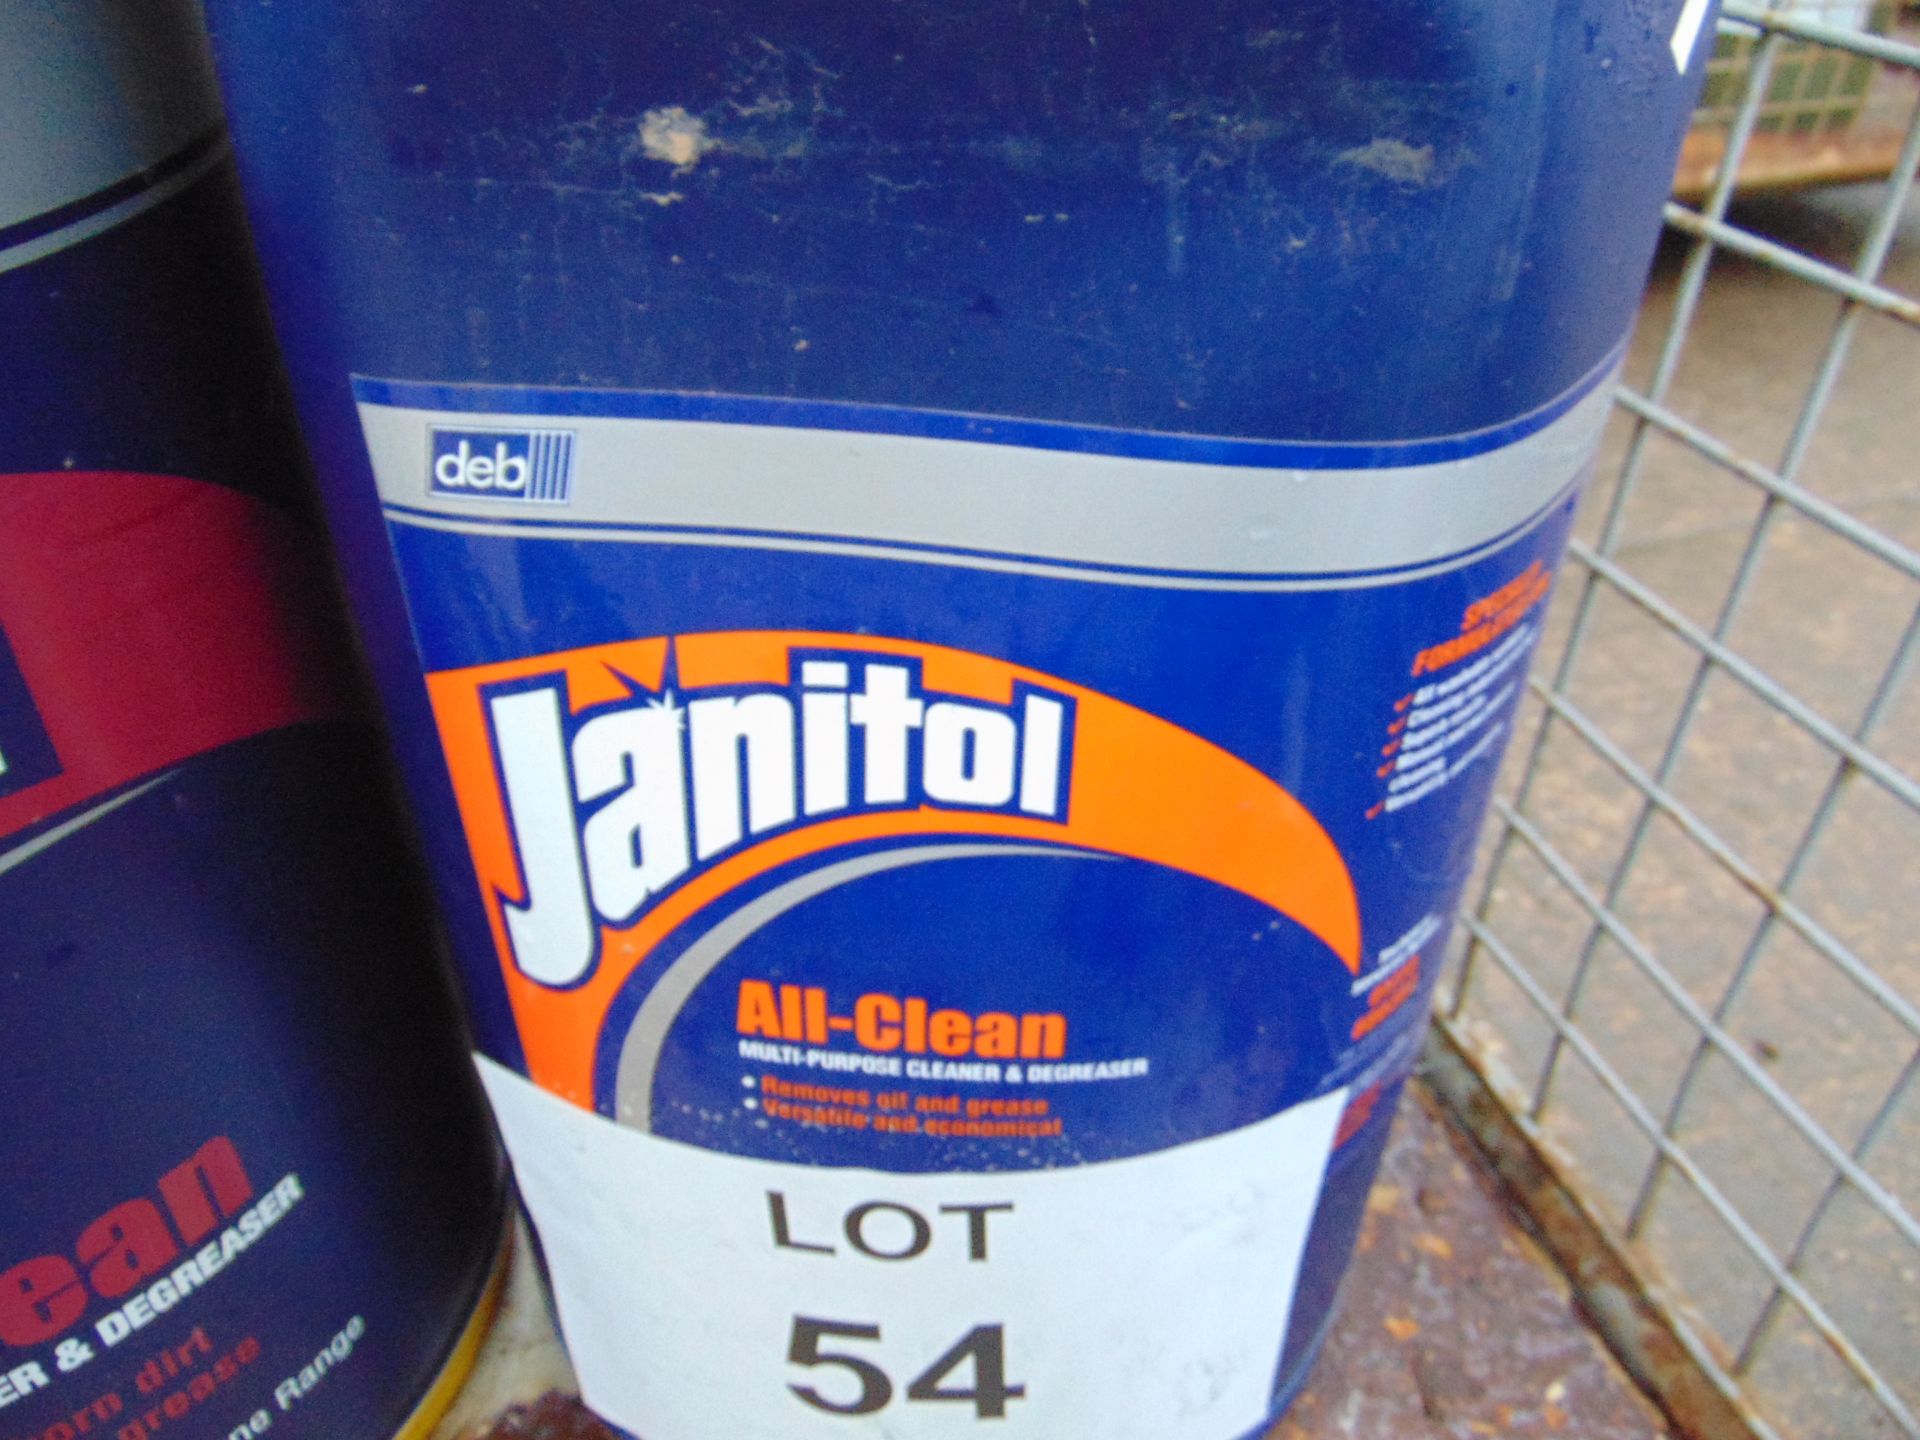 2 x Unused 25L Drums of Janitol Heavy Duty Degreaser Cleaner - Image 2 of 3